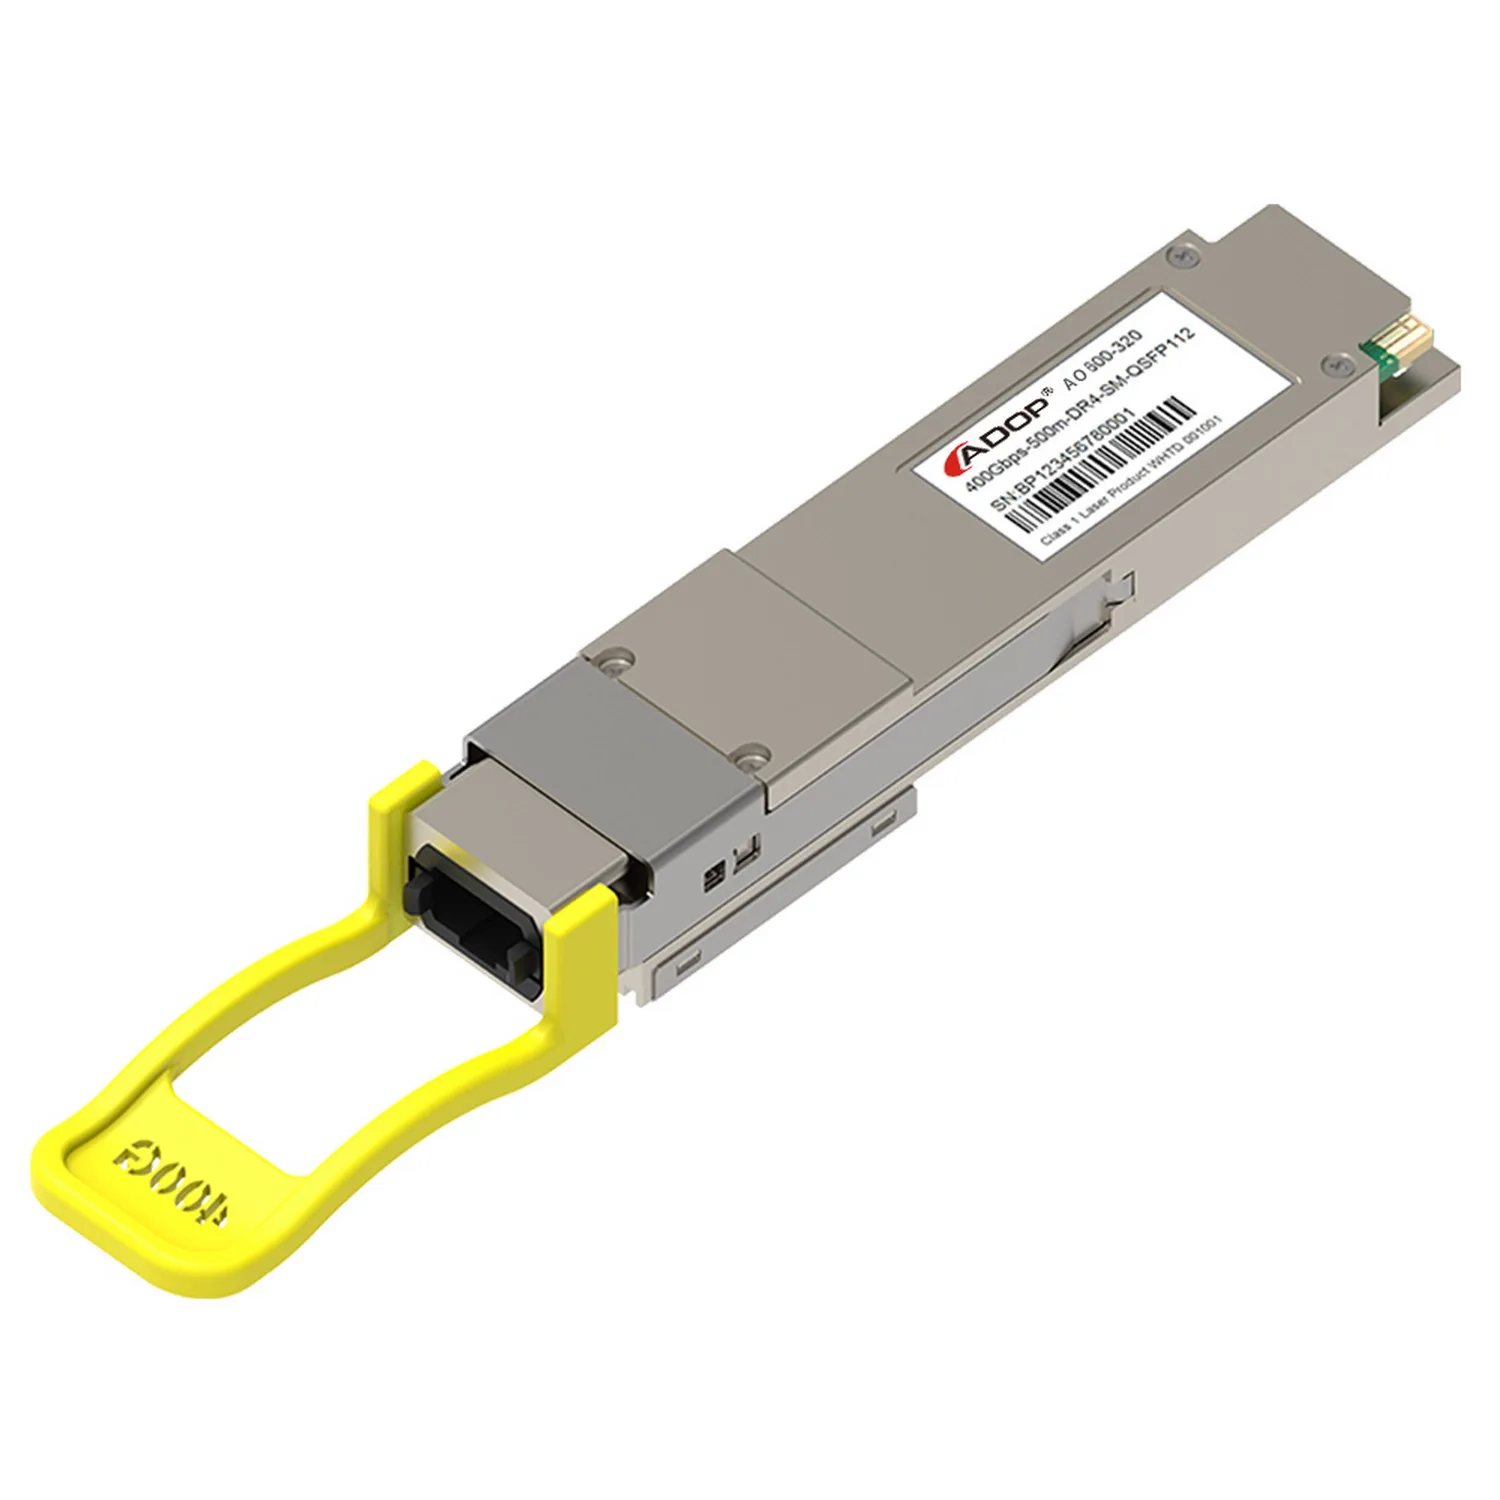 ADOP for Cisco QDD-400G-DR4-S Compatible 400G DR4 QSFP-DD PAM4 1310nm 500m DOM MTP/MPO-12 SMF Optical Transceiver Module 400g dr4 qsfp dd pam4 1310nm 500m dom mtp mpo 12 smf 400gbase optical transceiver module 400g qsfp